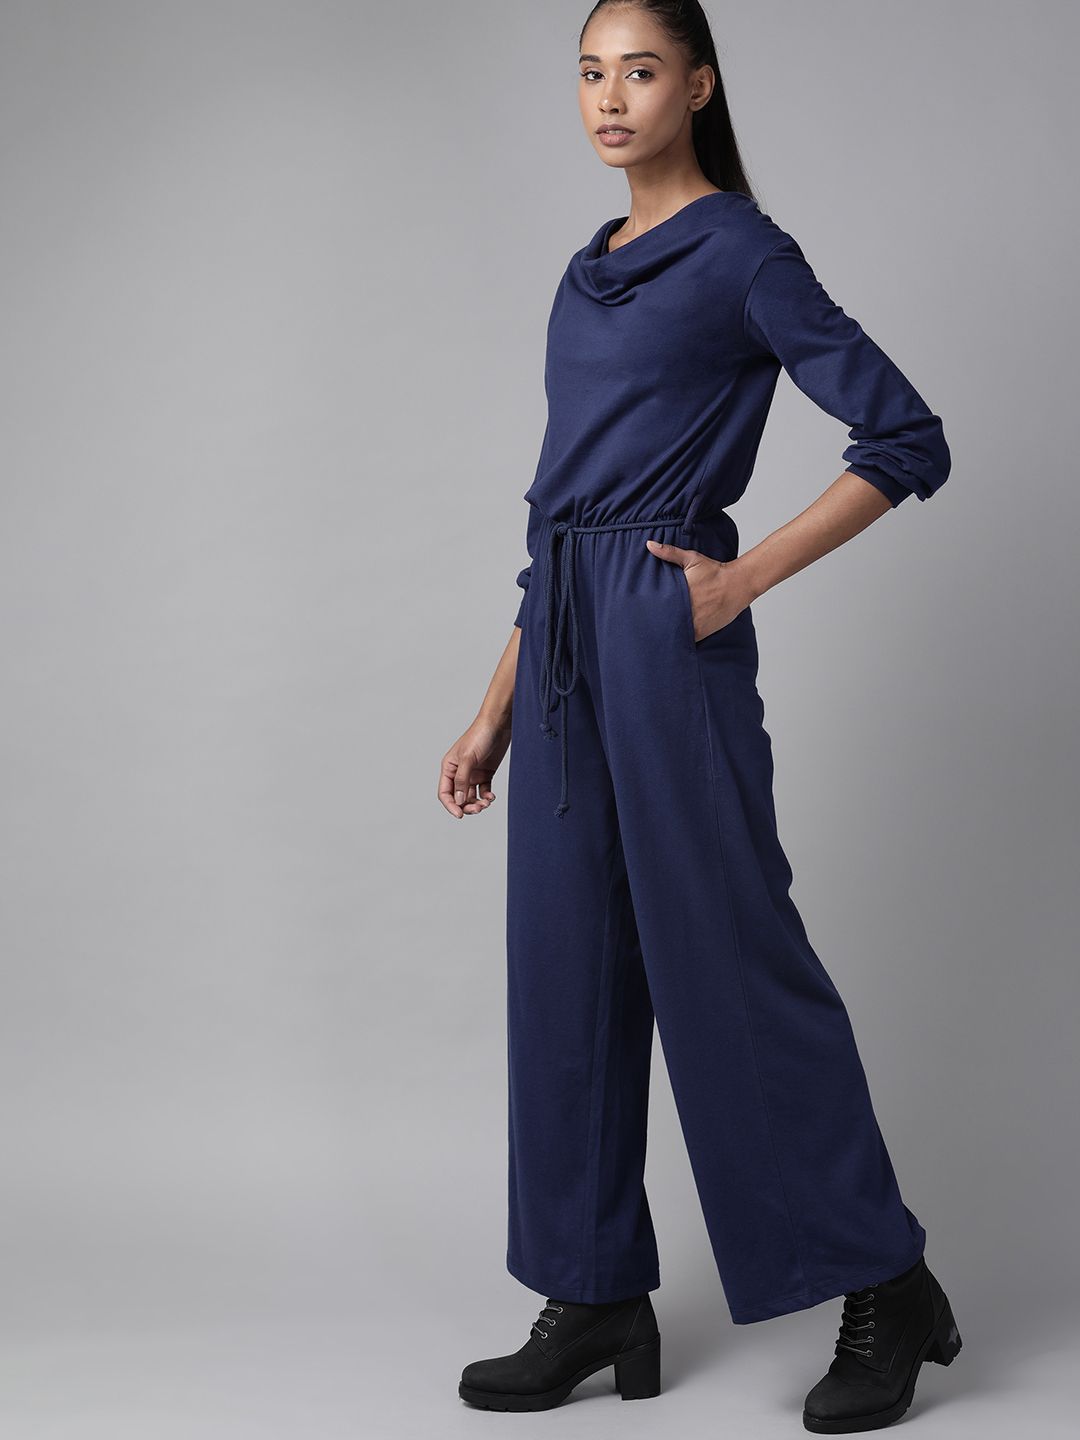 Roadster Women Navy Blue Solid Cowl Neck Basic Jumpsuit with Belt Price in India